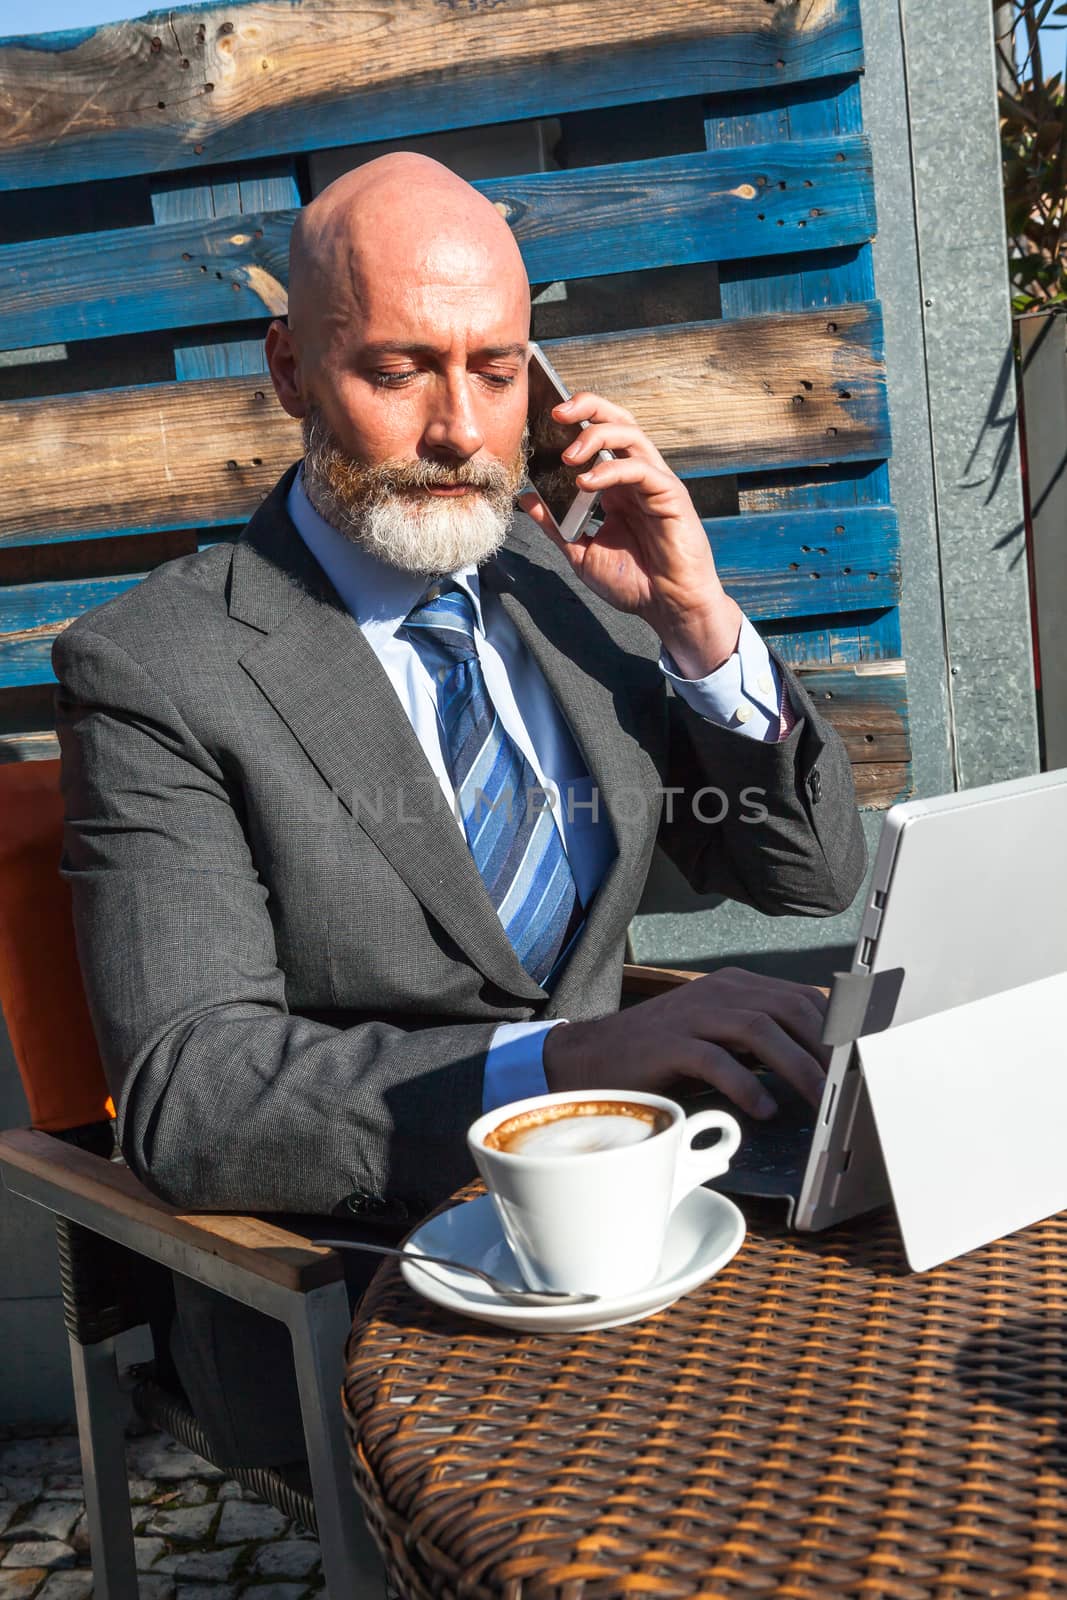 Bearded businessman with working outside the office by andongob